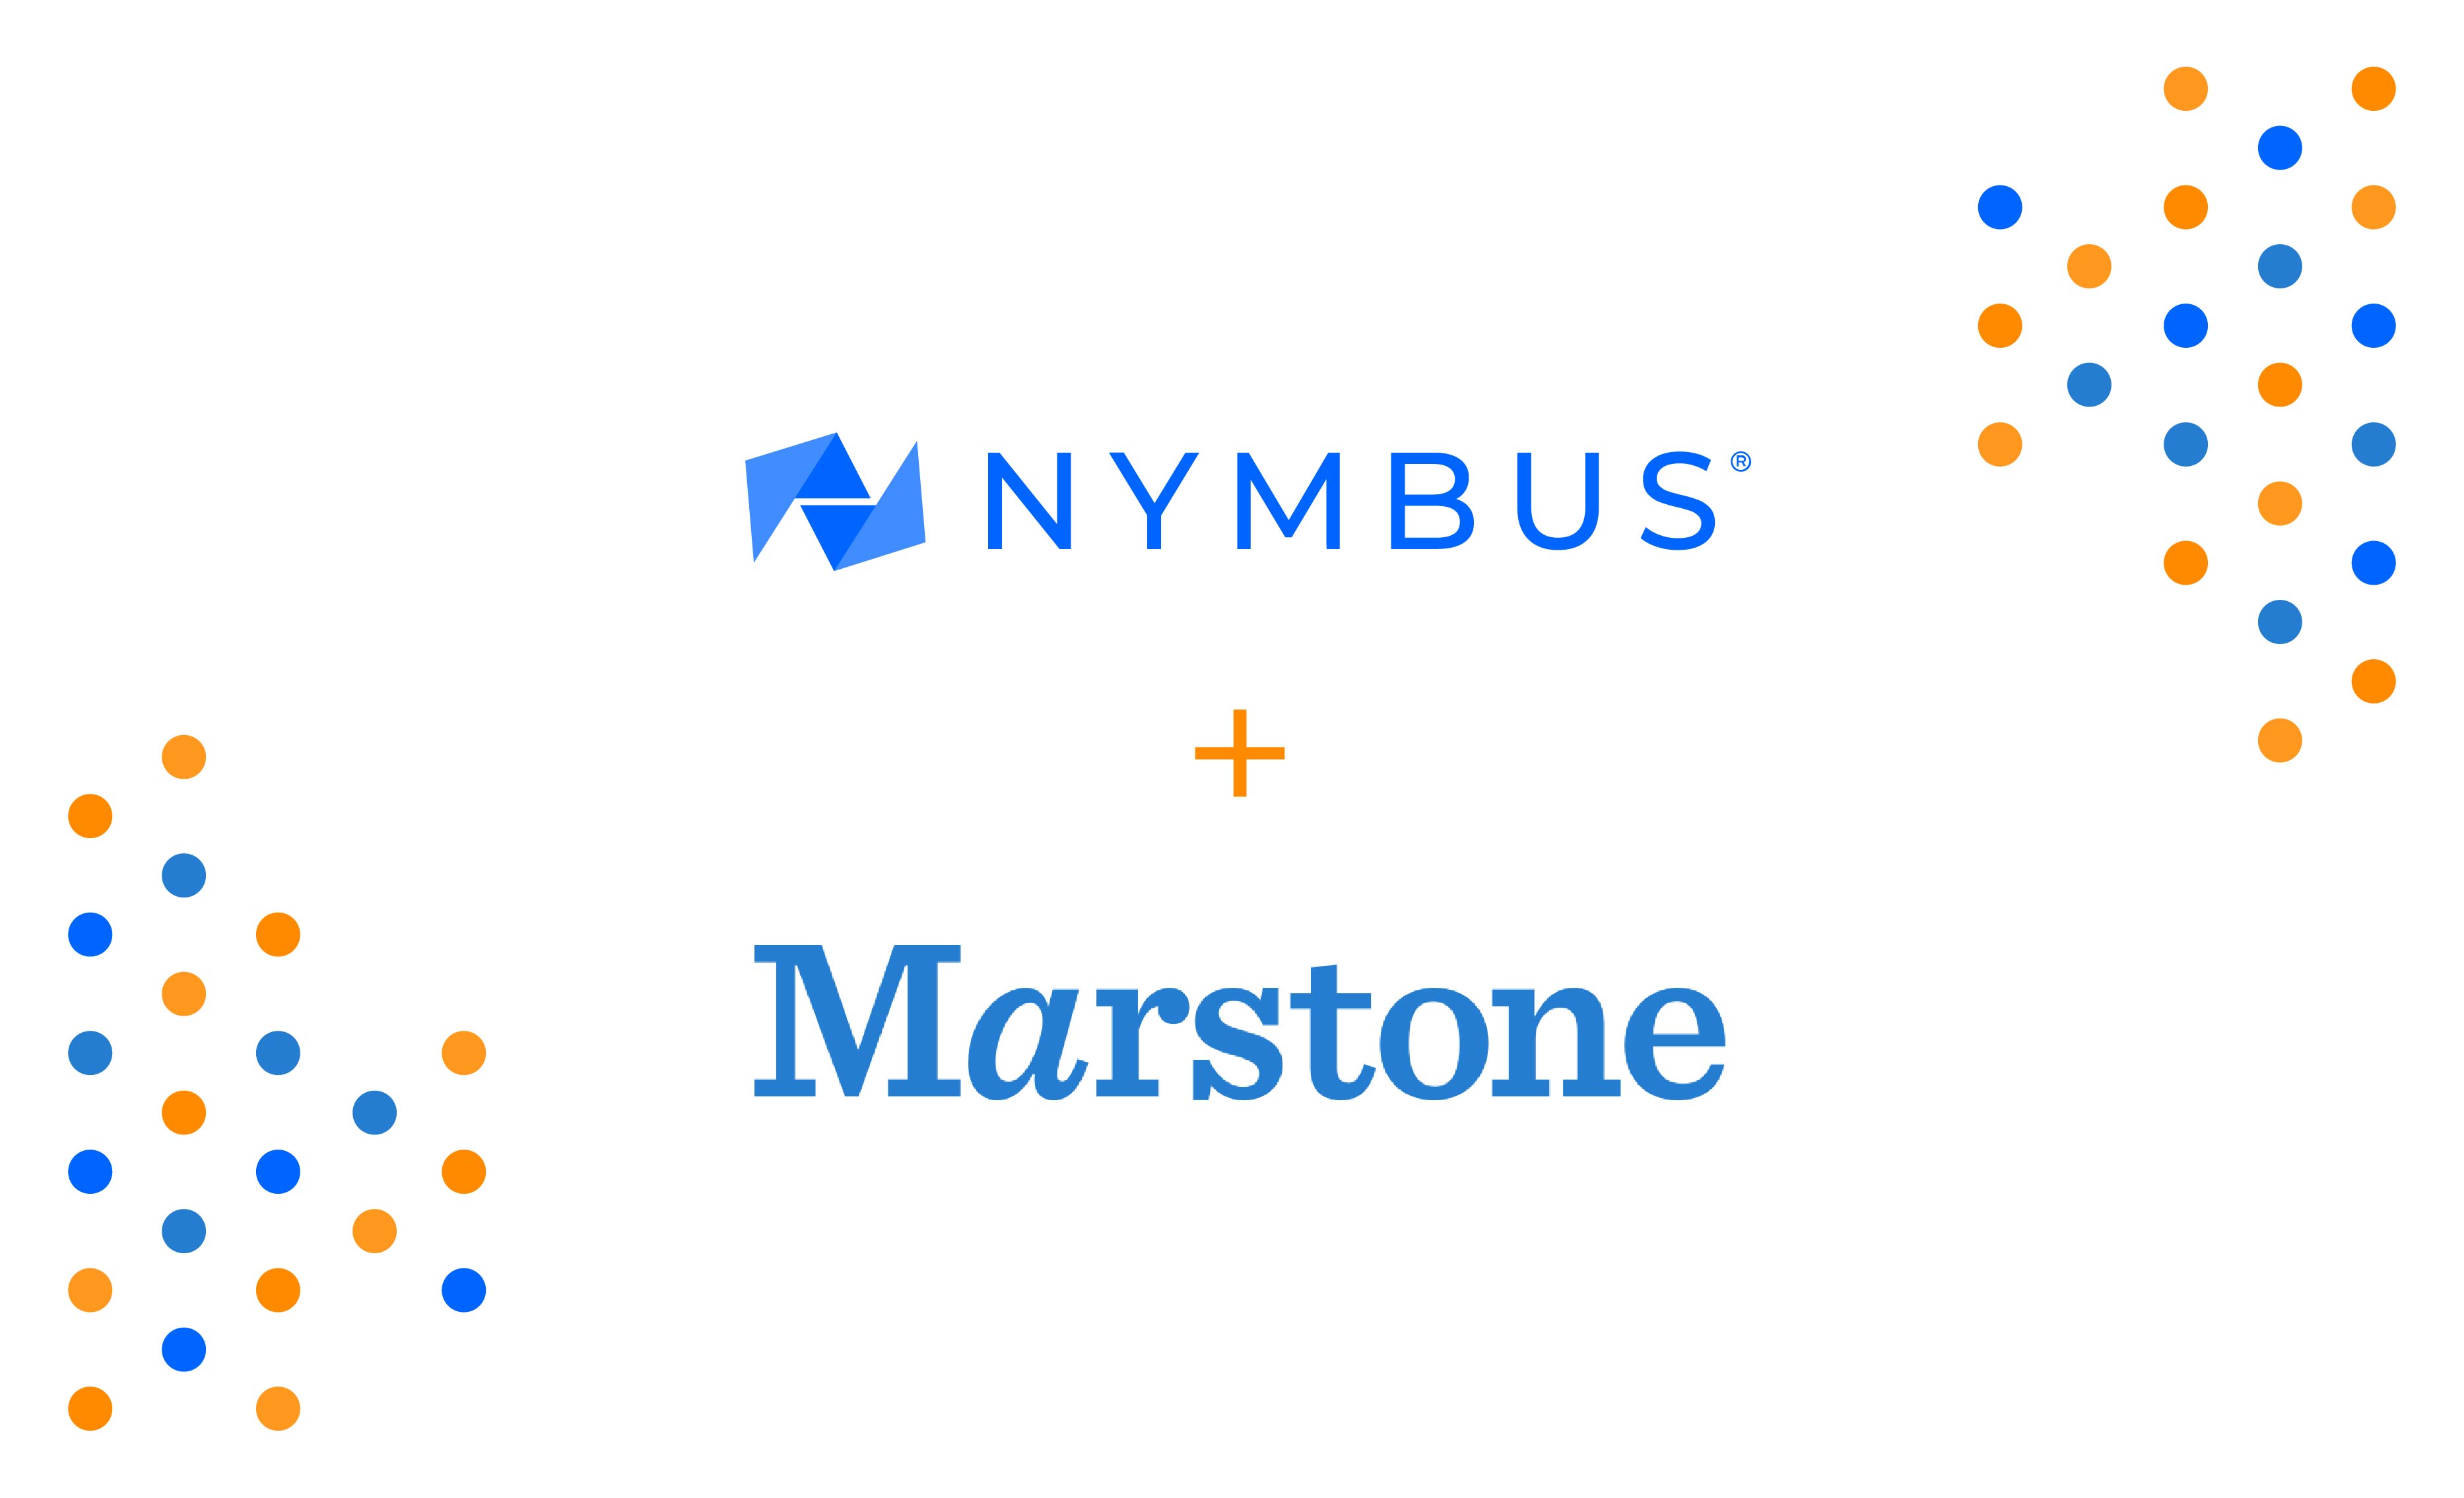 Marstone Continues Digital Wealth Management Platform Expansion Through Partnership with Nymbus